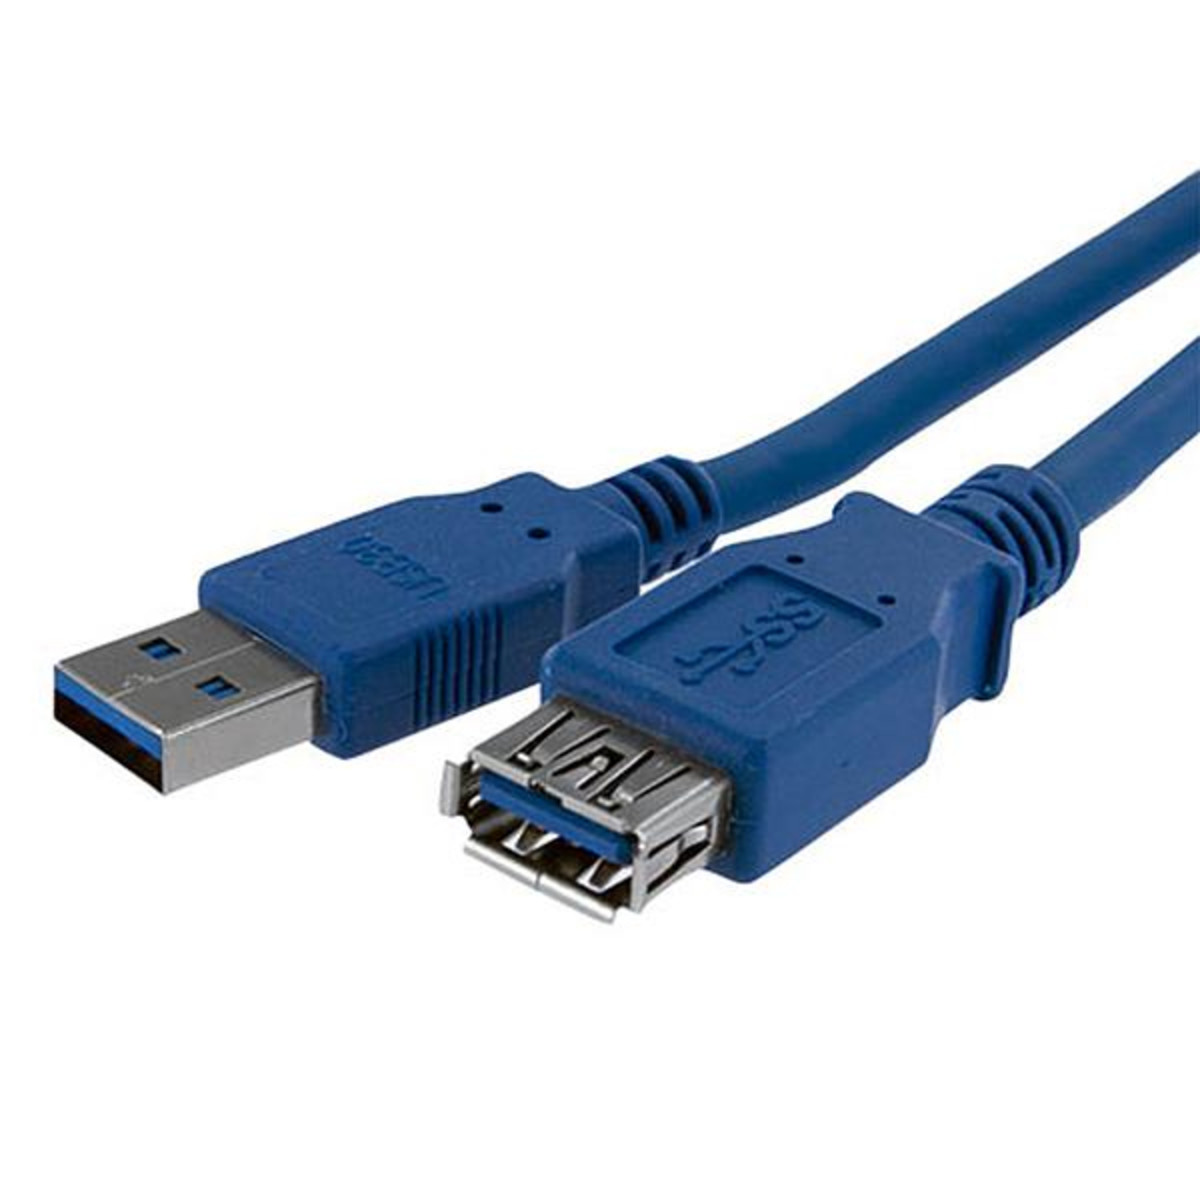 1m SS USB 3.0 Extension Cable A to A